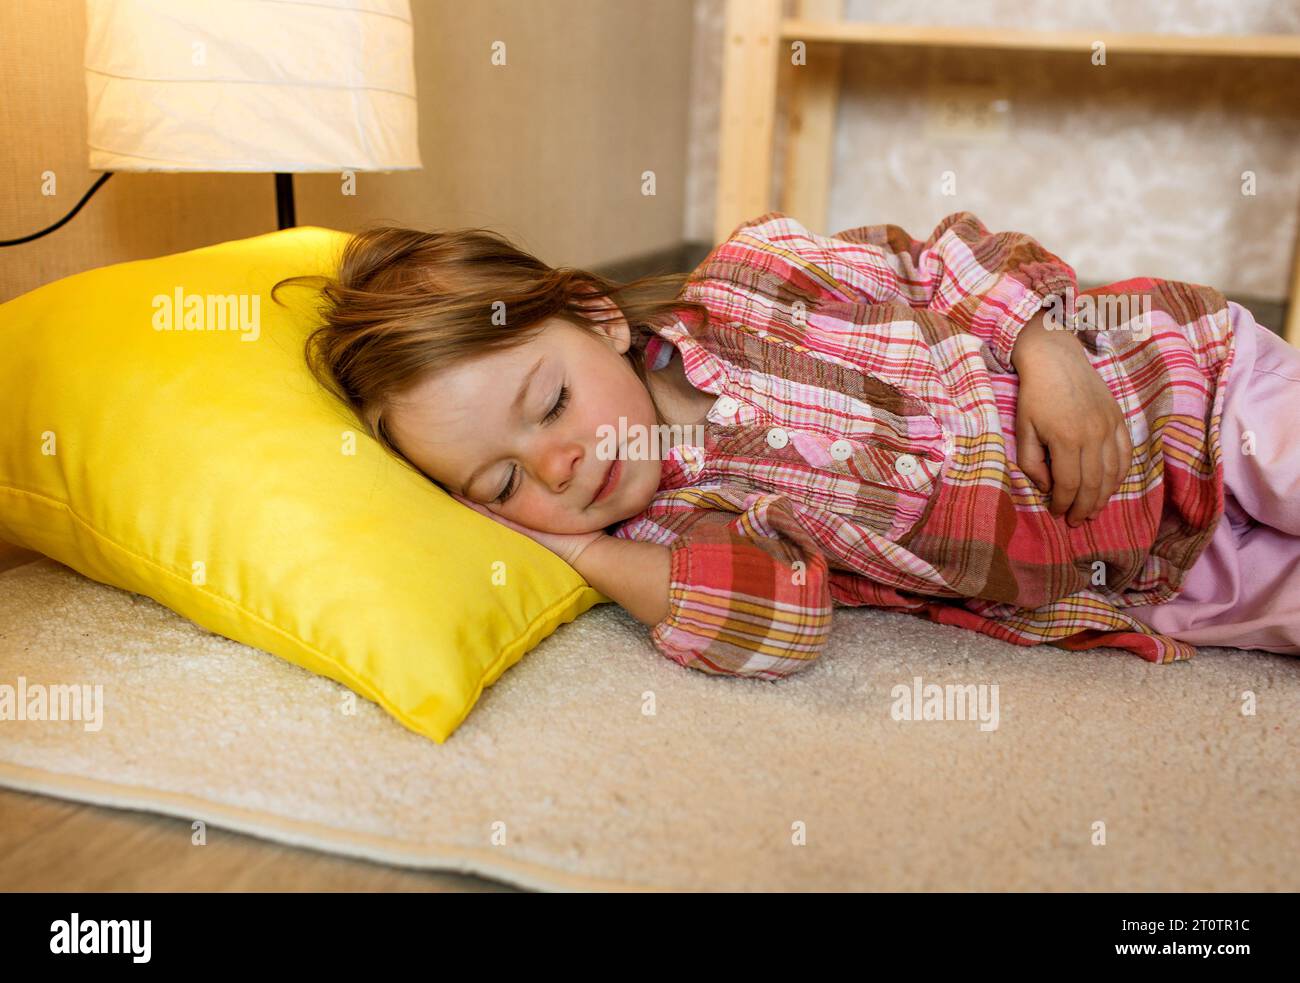 A small child sleeps on the floor at home Stock Photo